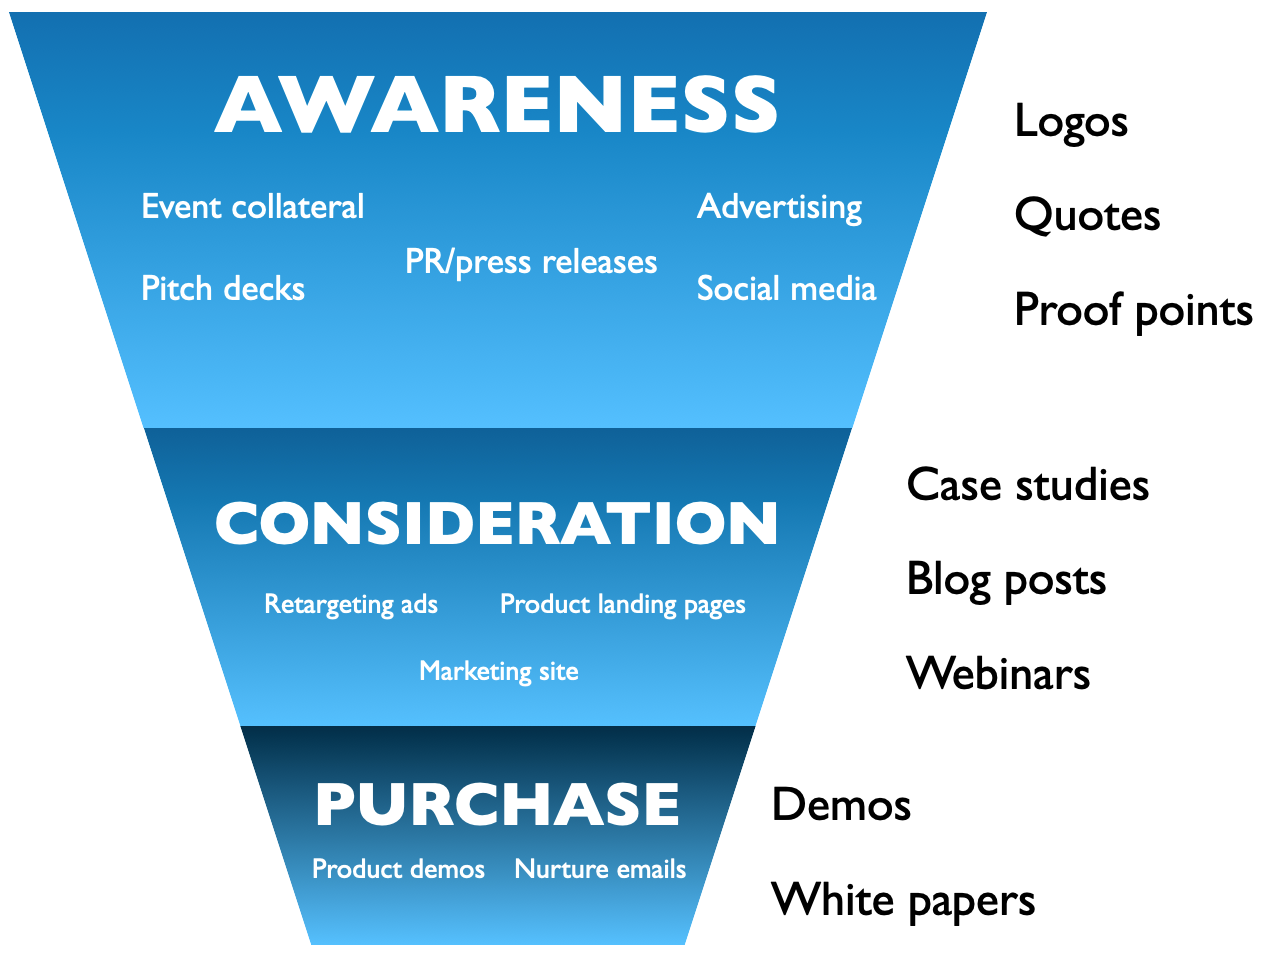 B2B funnel mapping for showing social proof